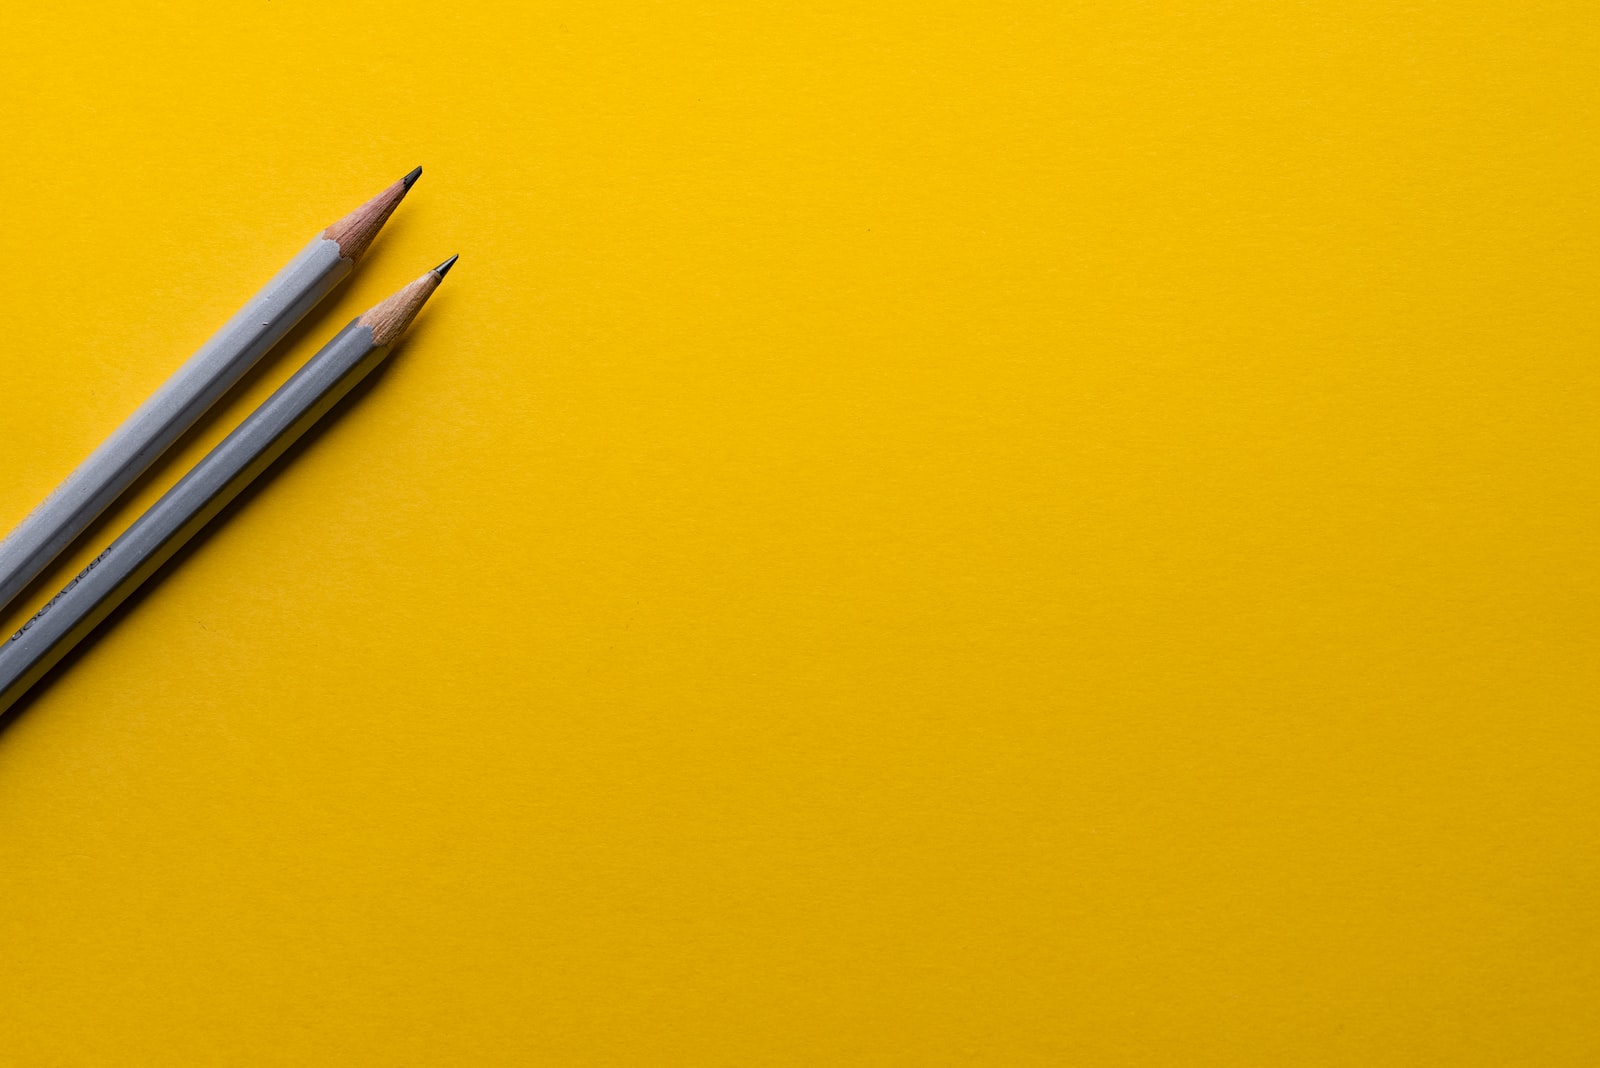 two gray pencils on yellow surface - definition of ready